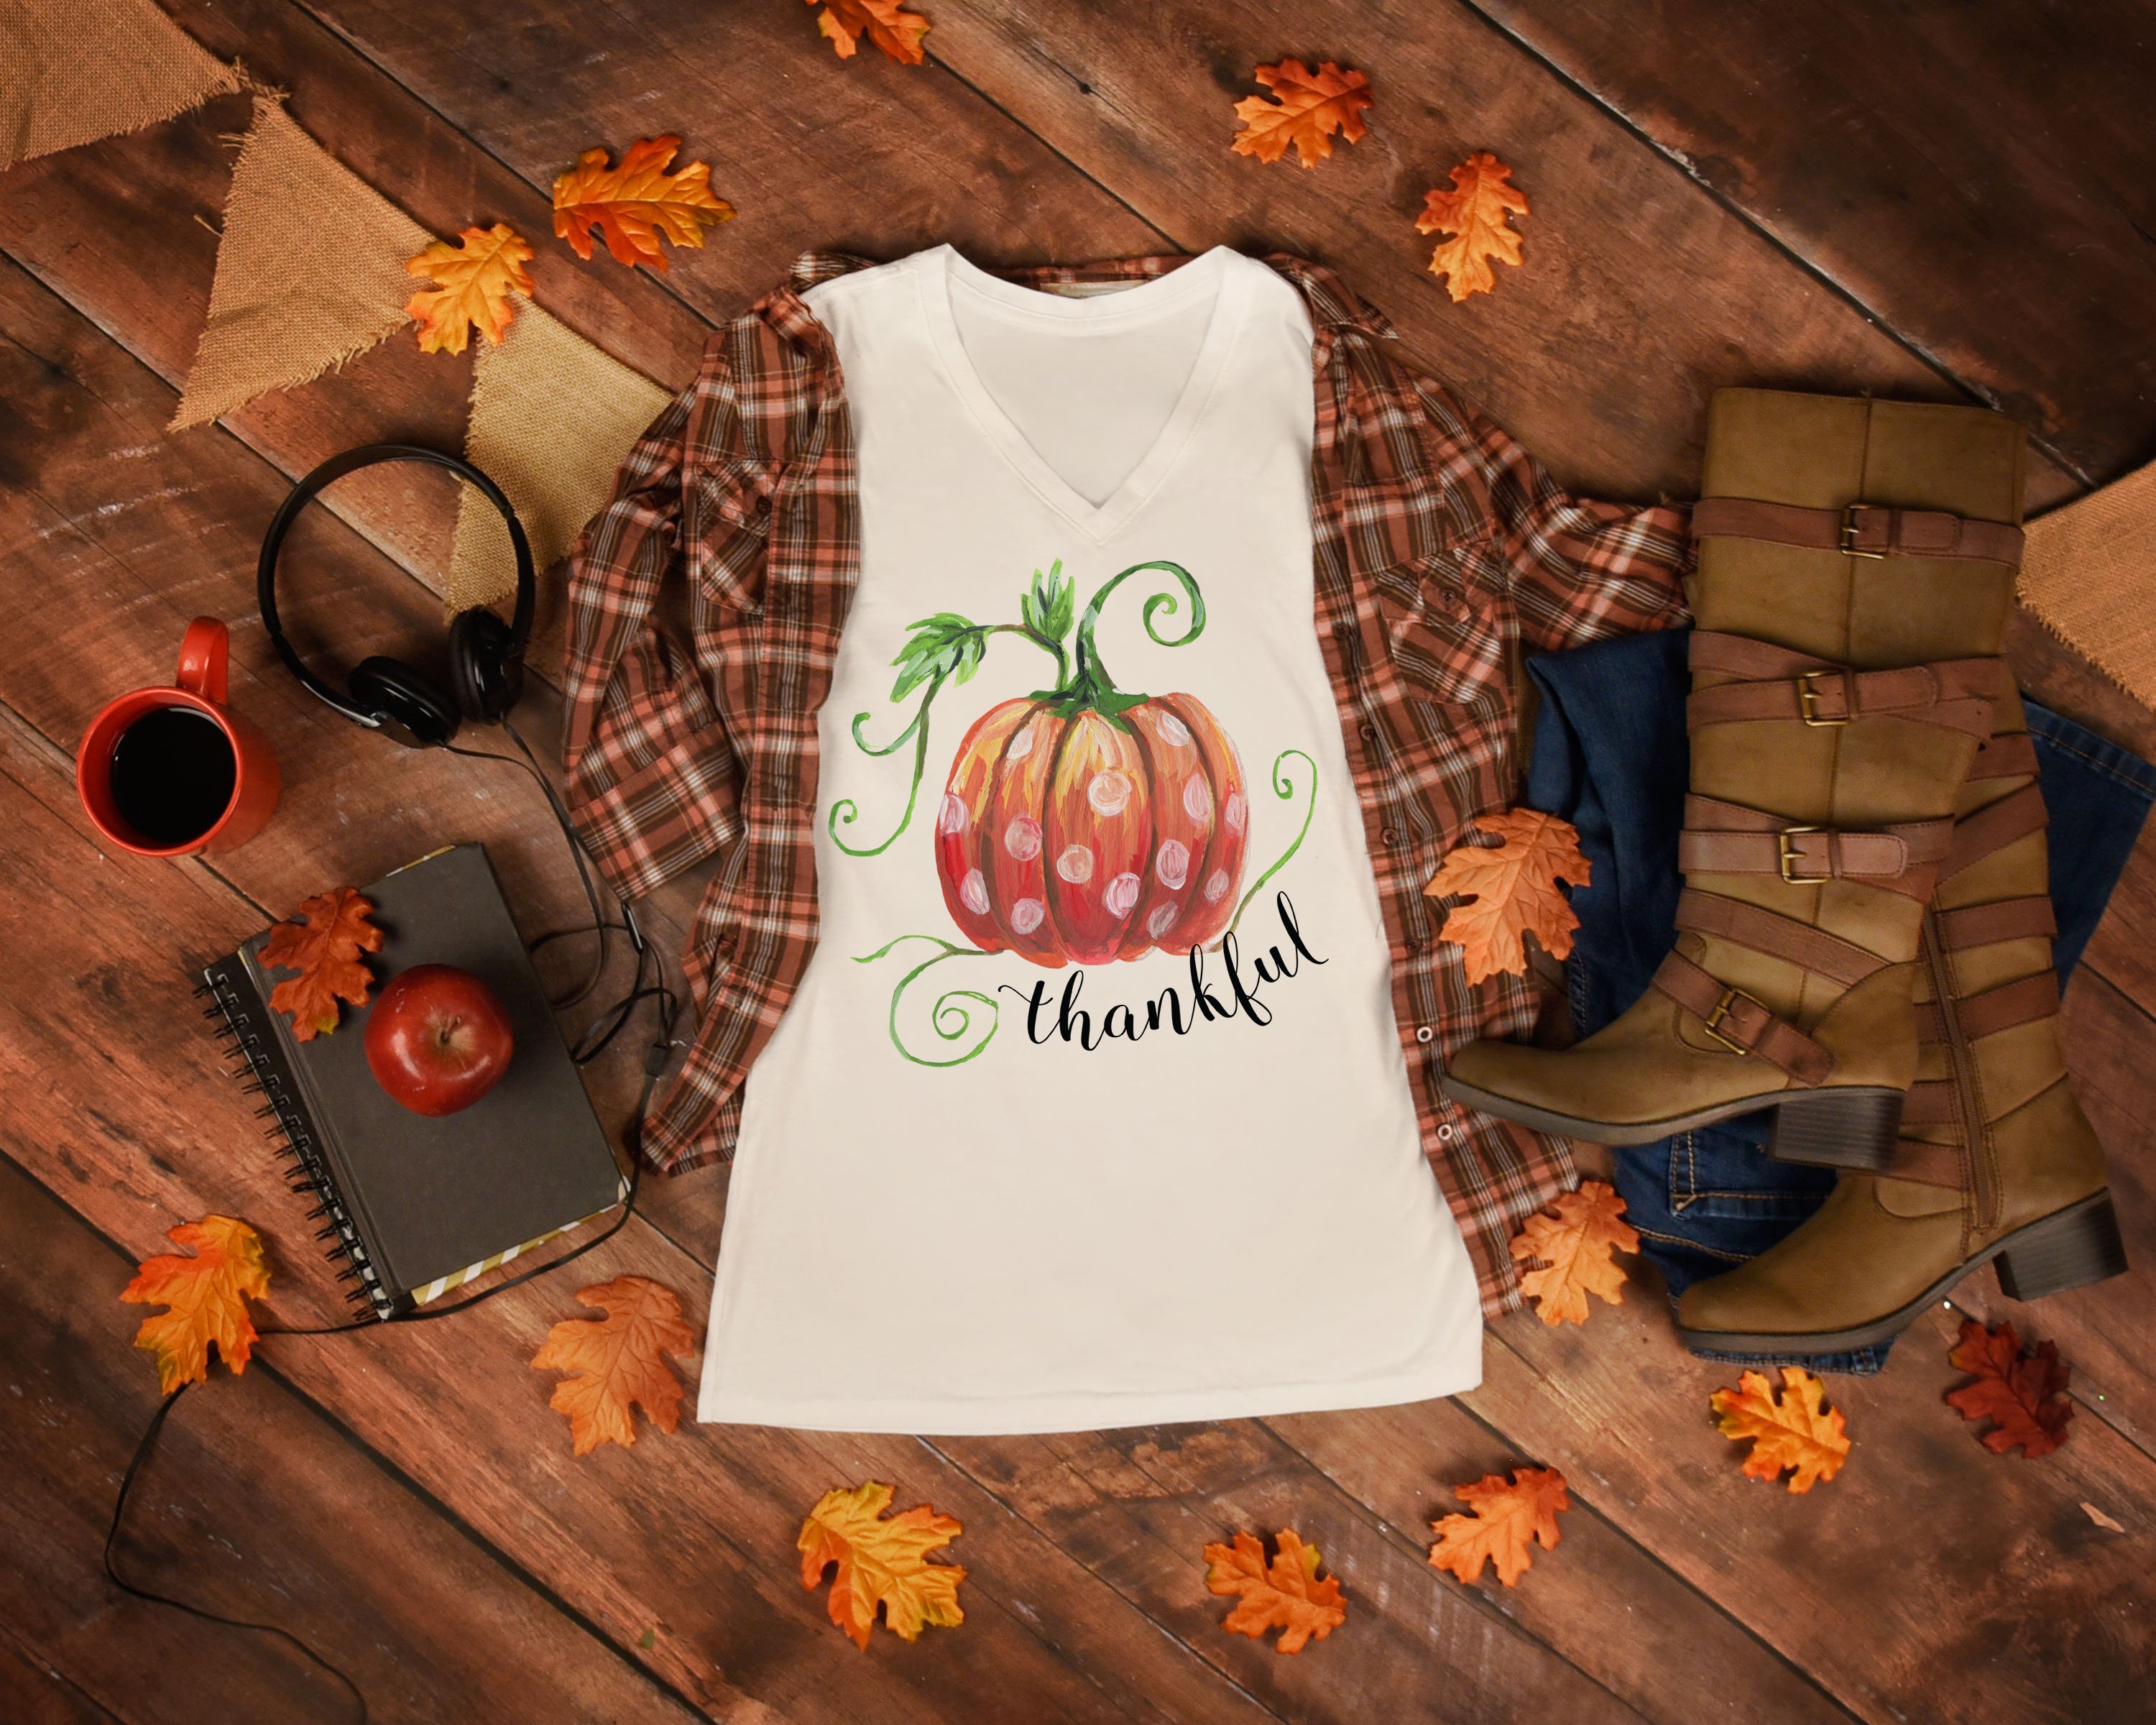 High quality pumpkin illustration for your clothes.